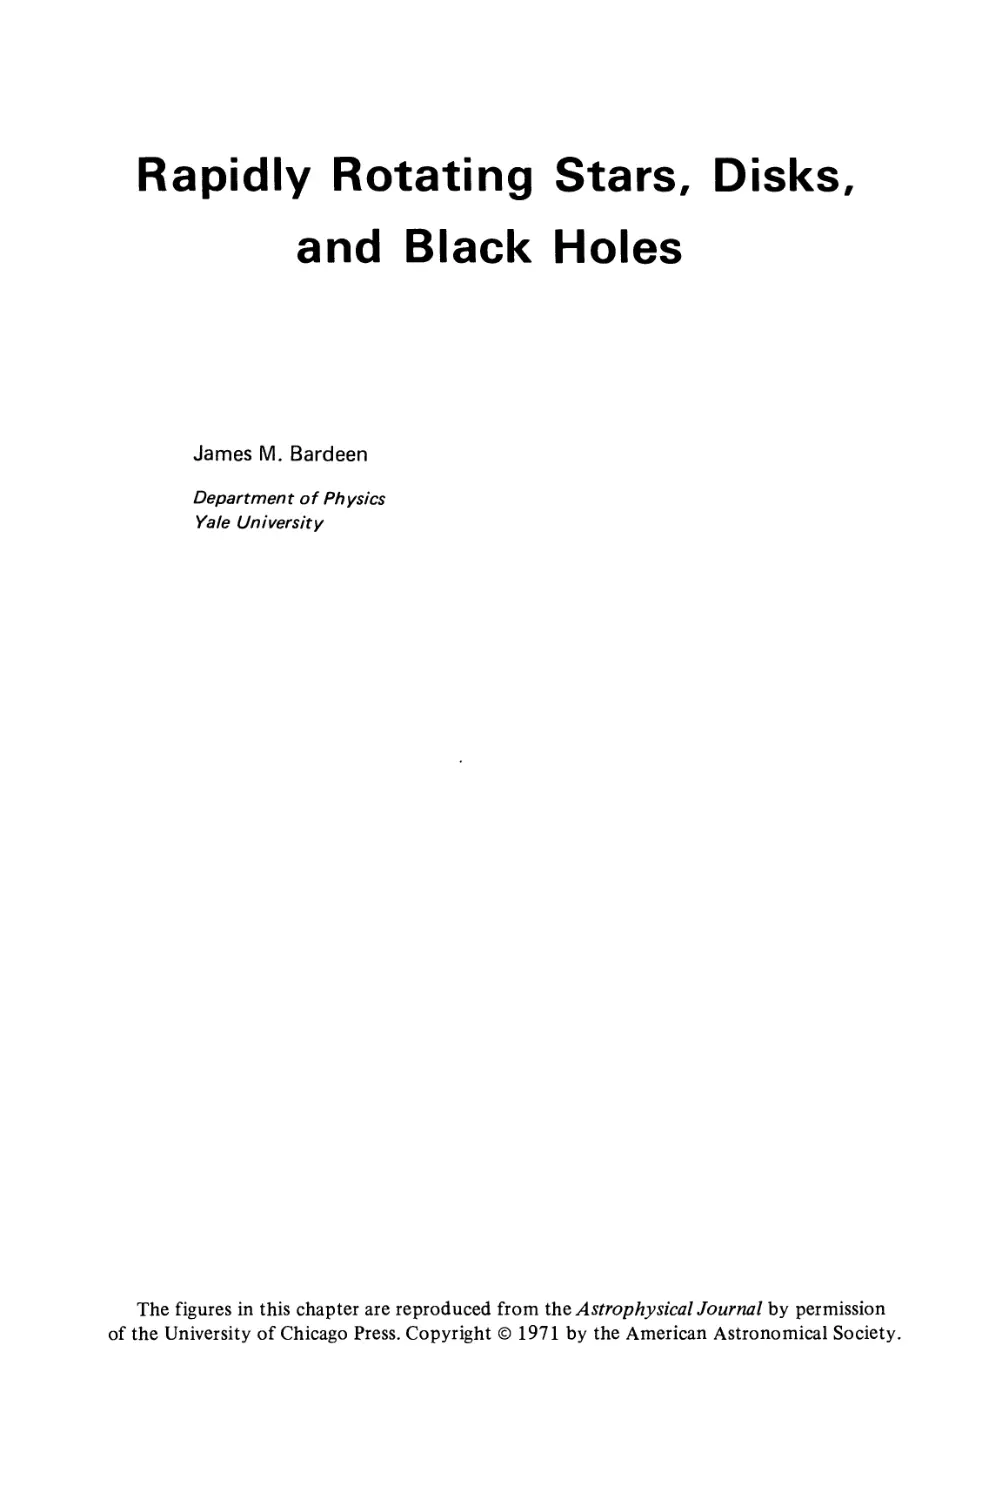 Rapidly Rotating Stars, Disks, and Black Holes / J.M. Bardeen